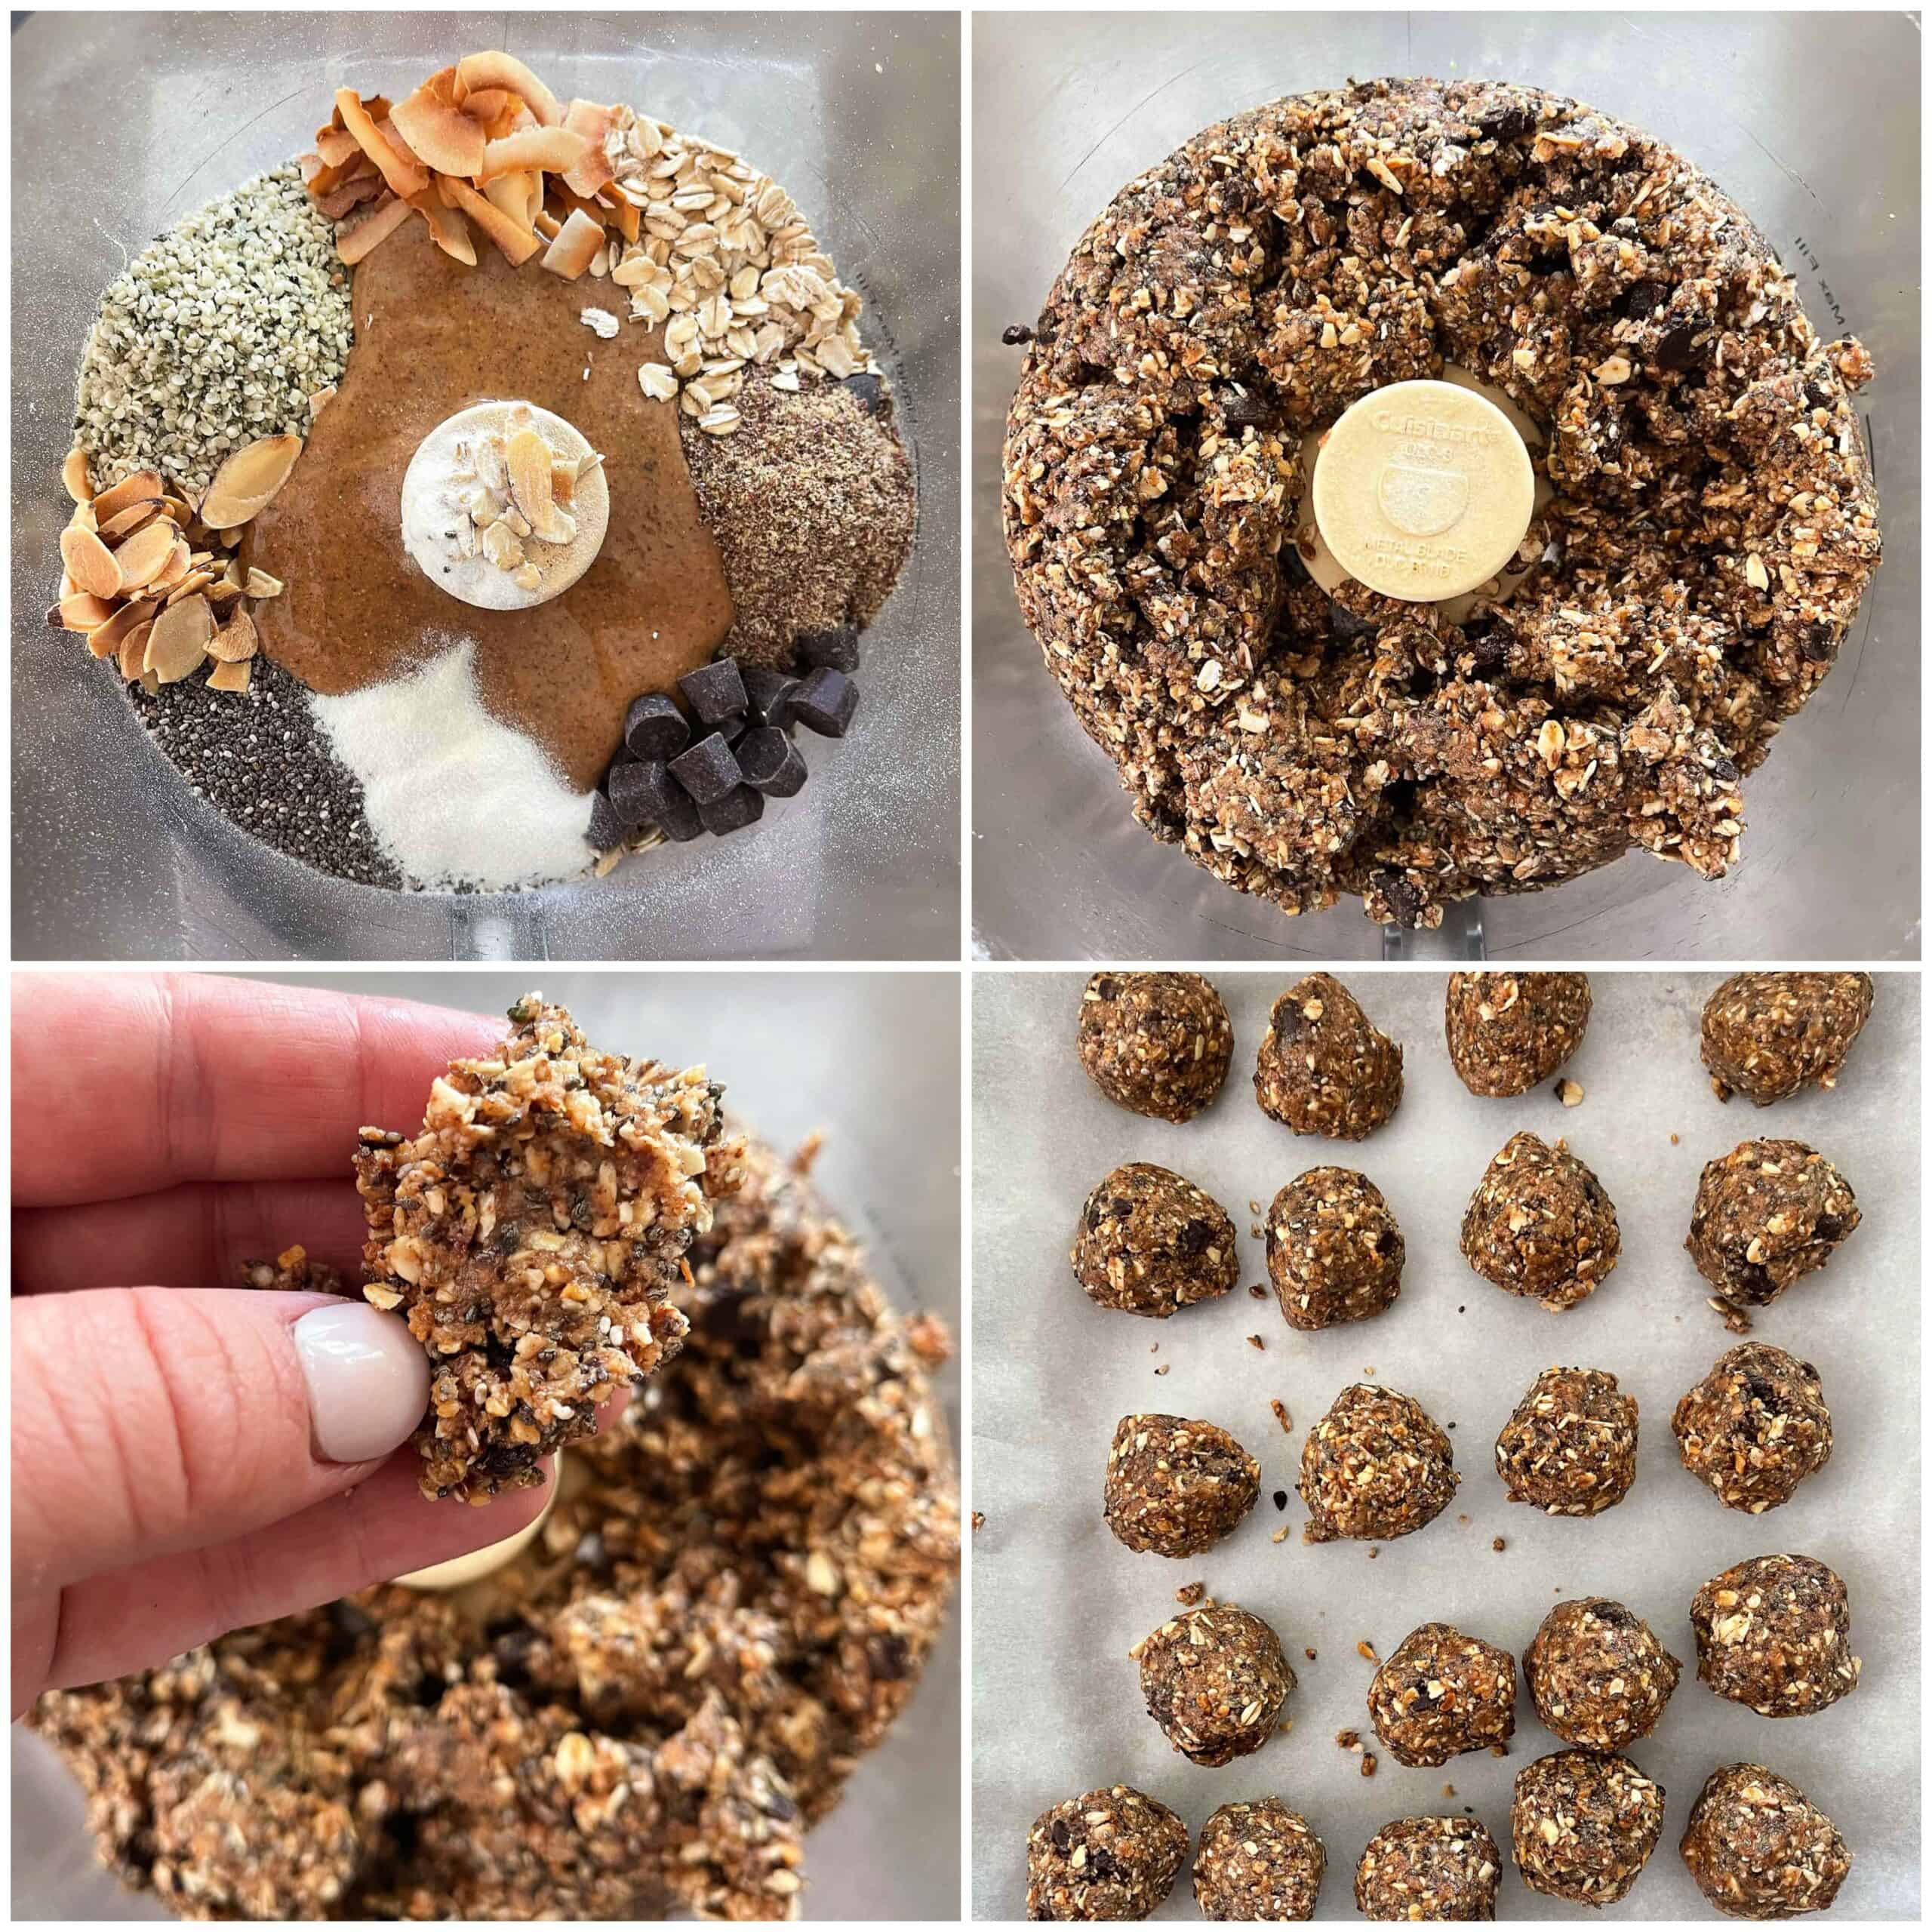 4 pictures showing the ingredients for energy bites aka no bake cookie balls and the steps to make them. 